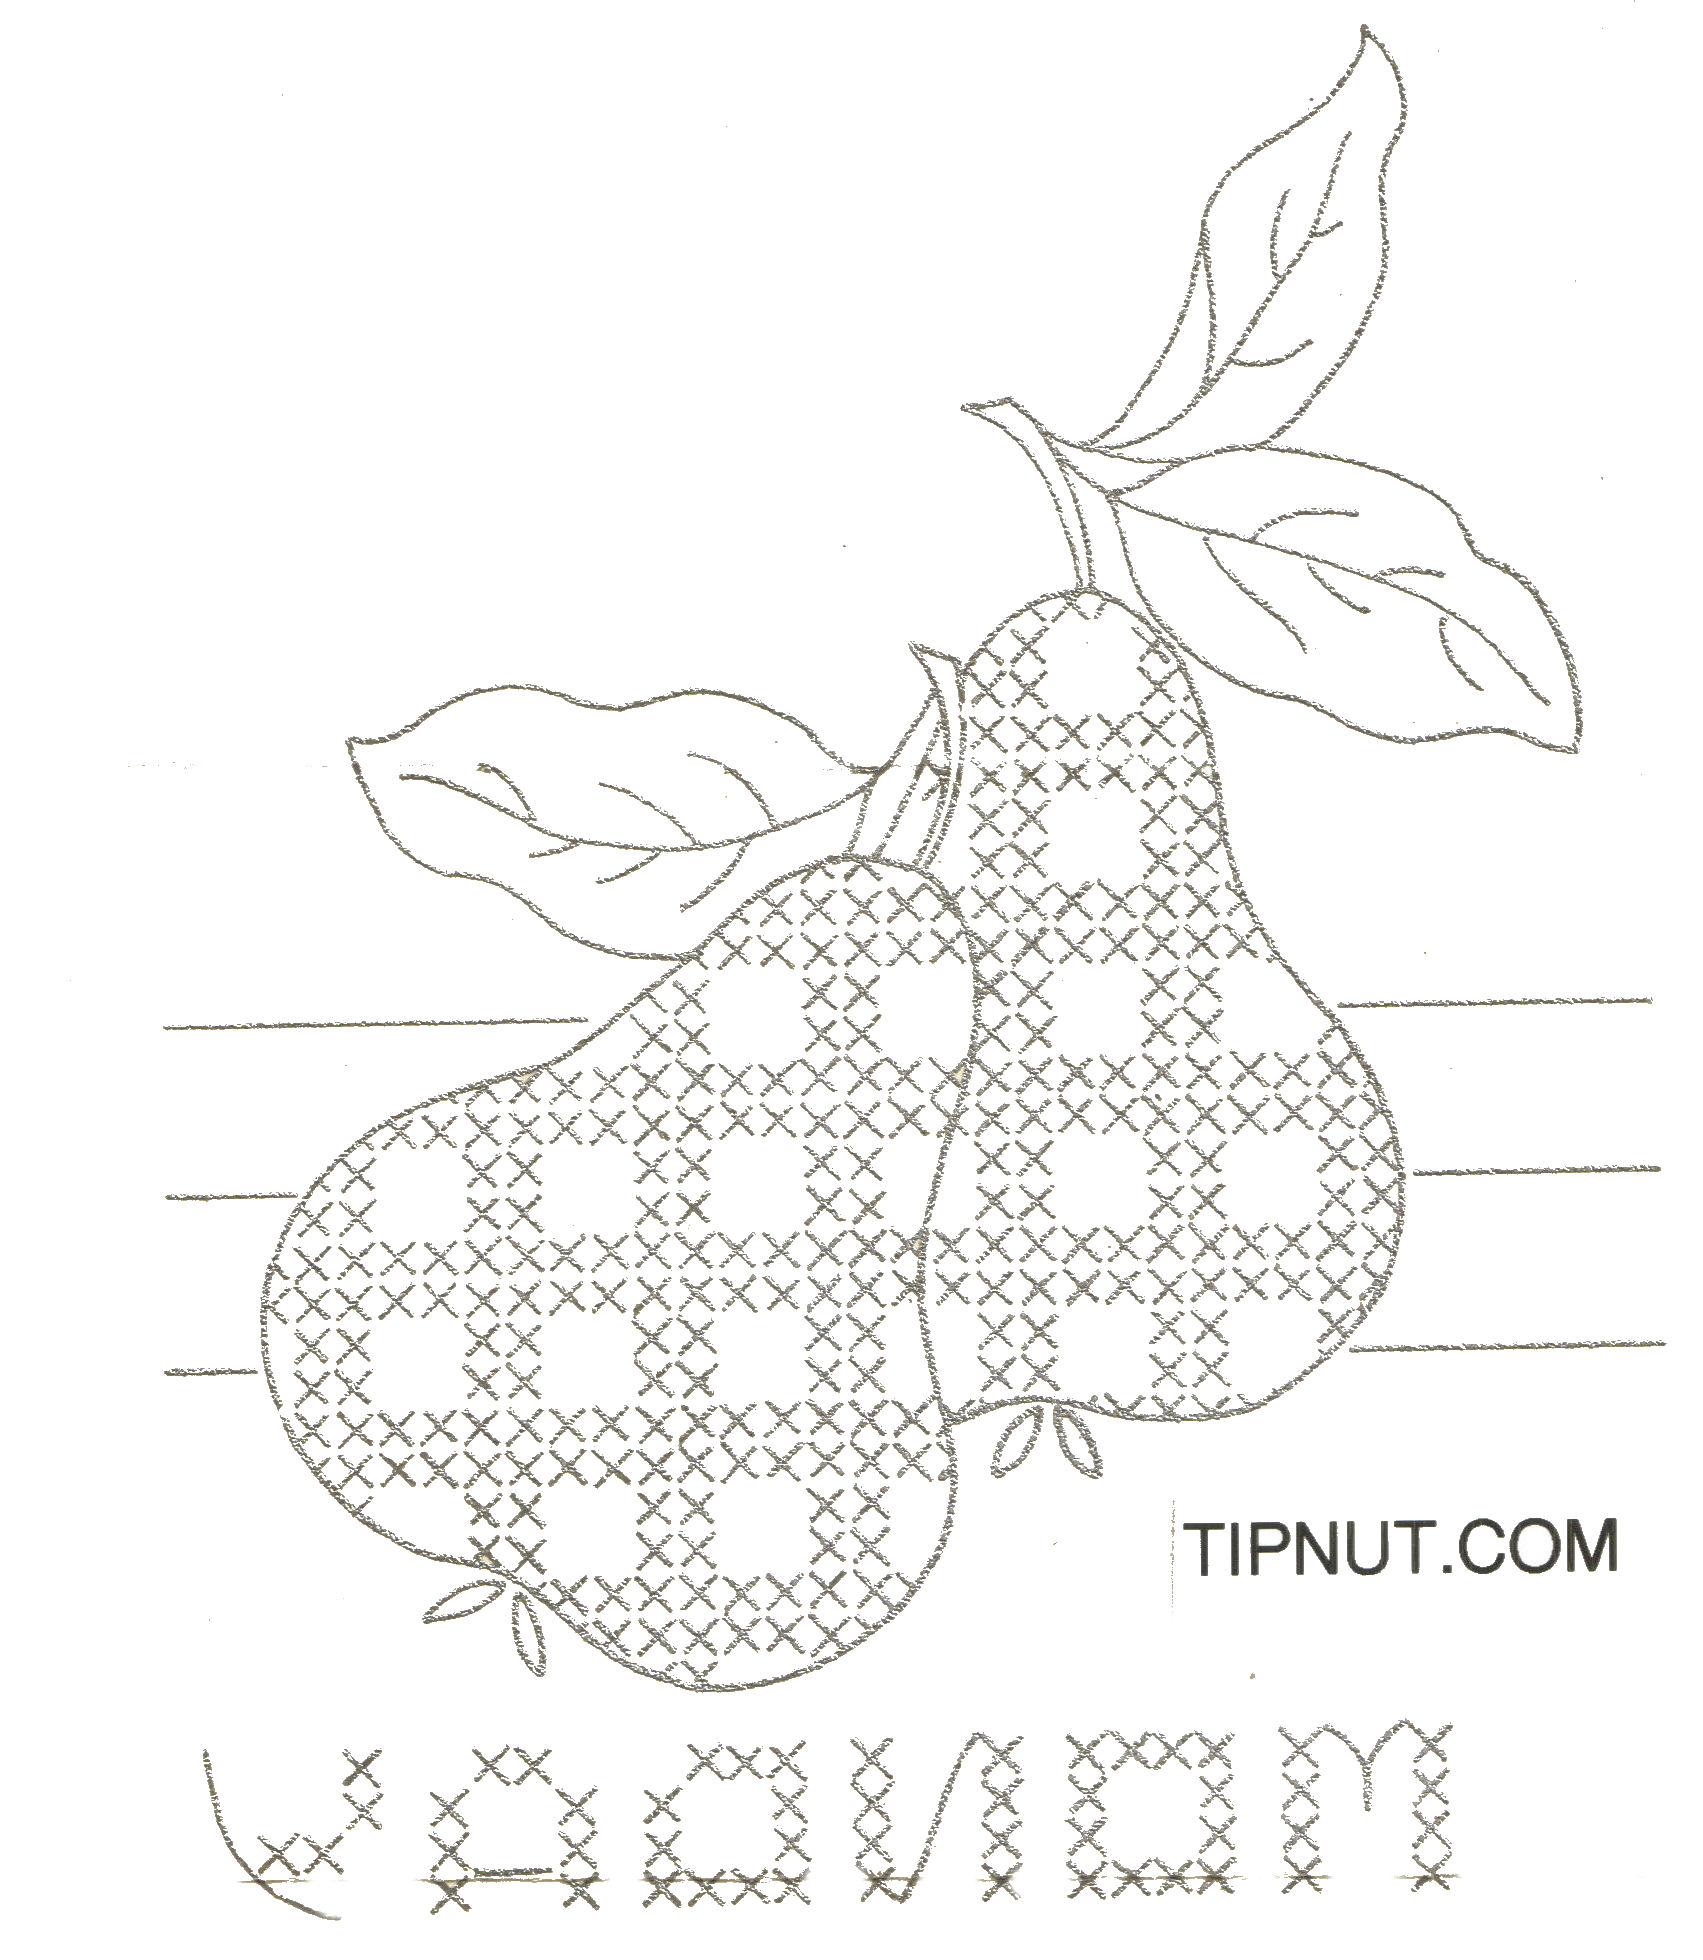 Gingham Embroidery Patterns Machine Embroidery Talks Gingham Fruit Cross Stitch Embroidery